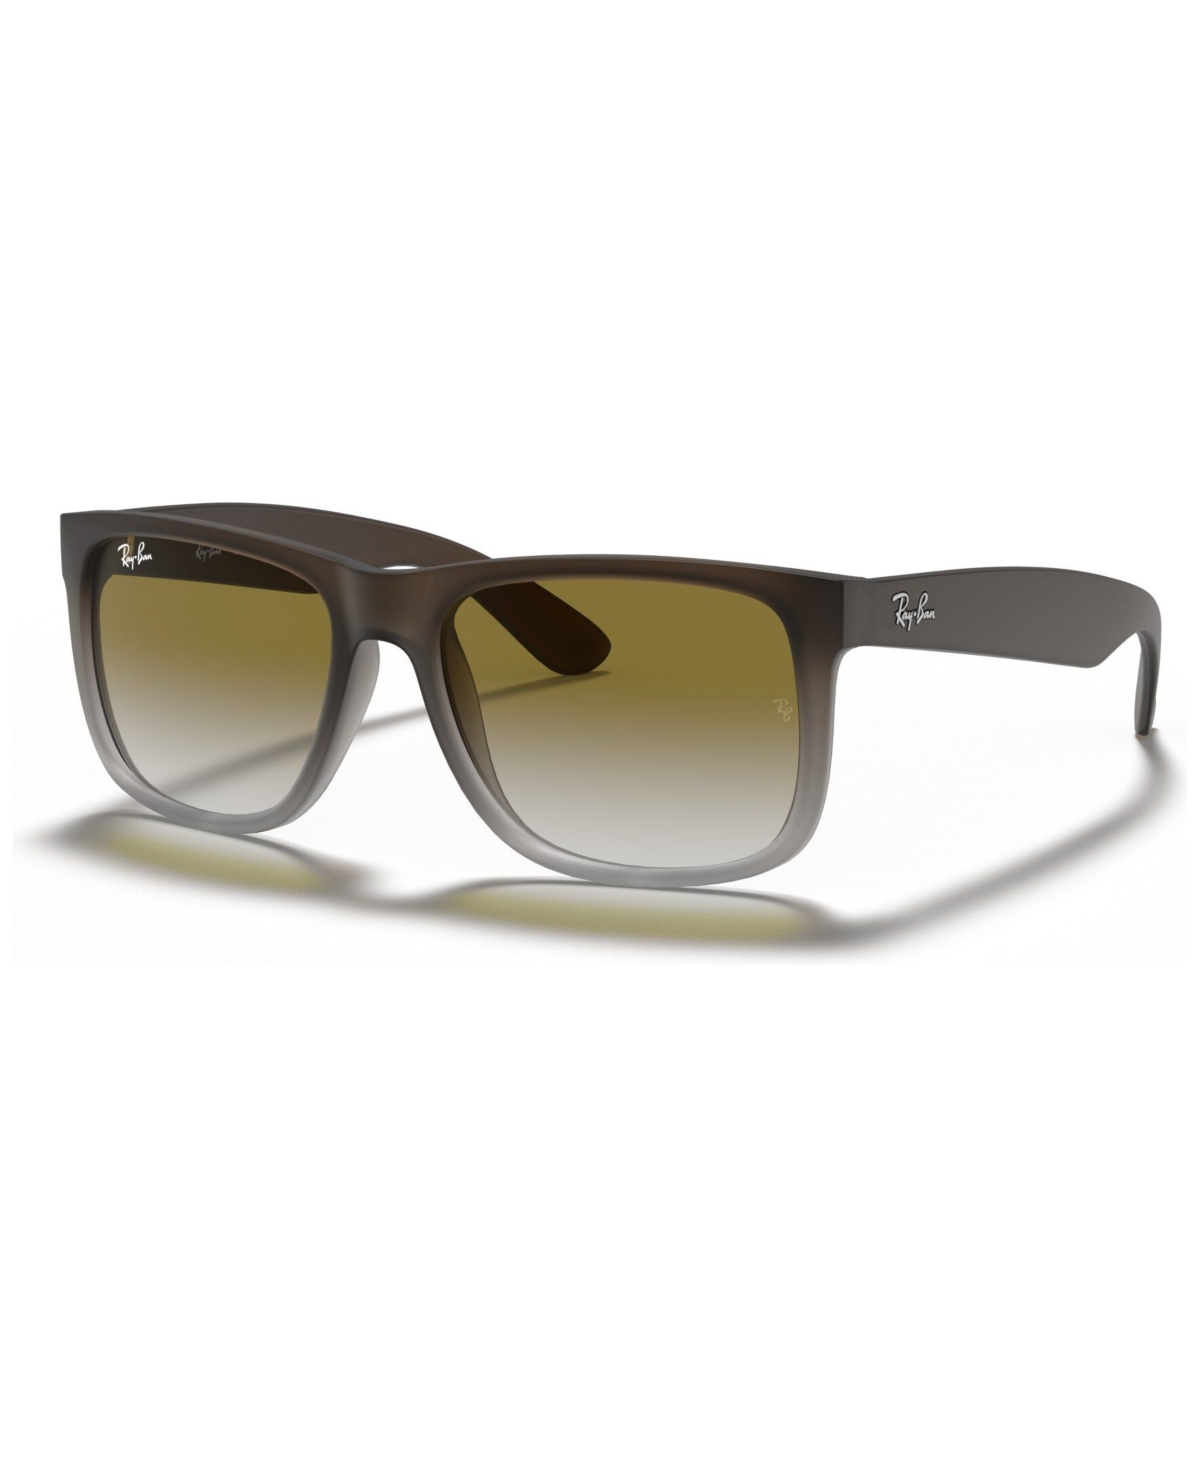 Ray Ban Unisex Sunglasses, Rb4165 Justin Gradient In Grey Light,green